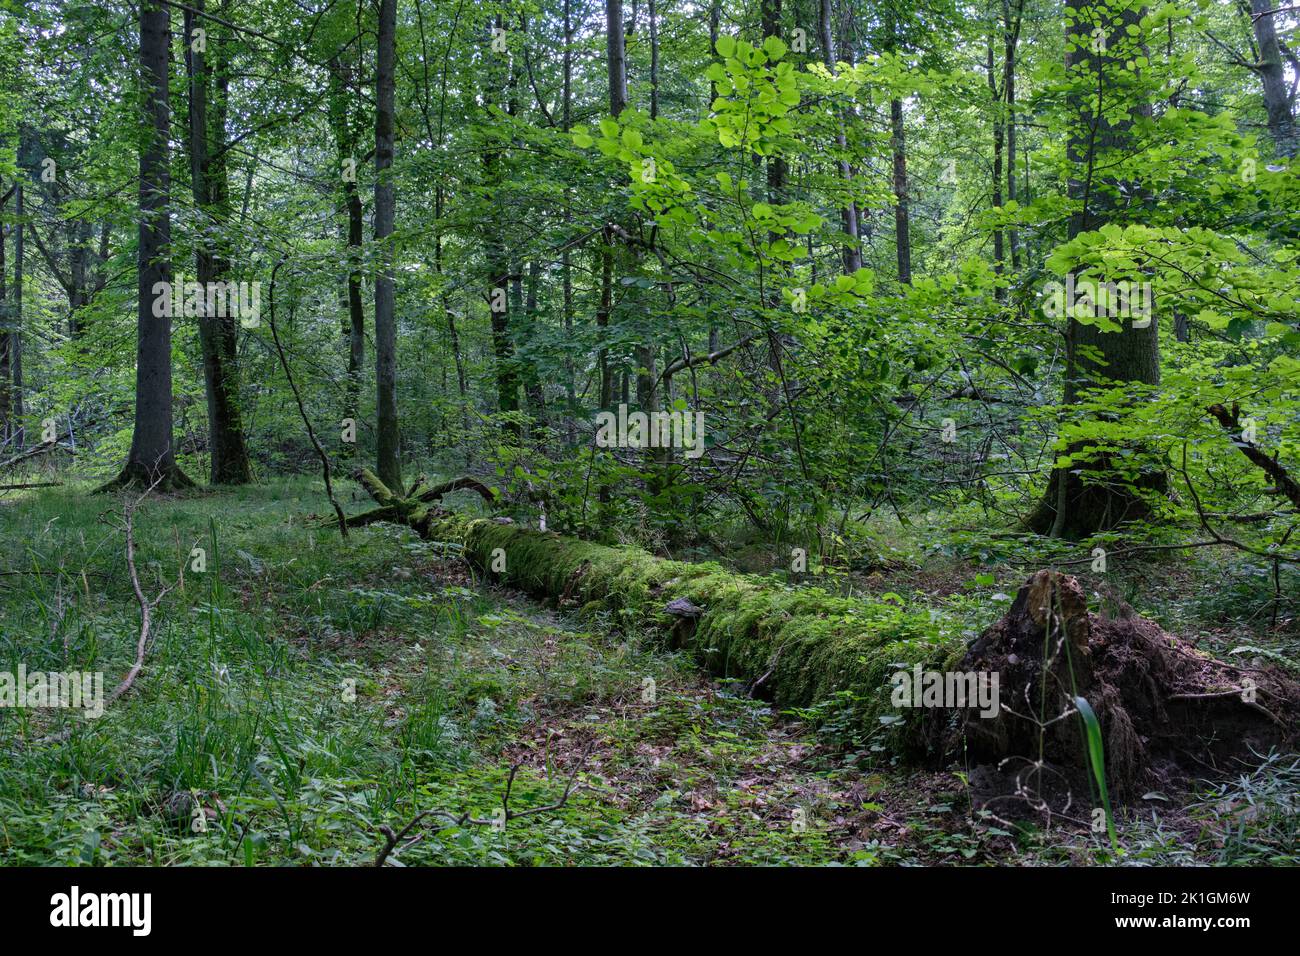 Summertime deciduous primeval stand with old broken  tree partly declined moss wrapped lying in foreground, Bialowieza Forest, Poland, Europe Stock Photo